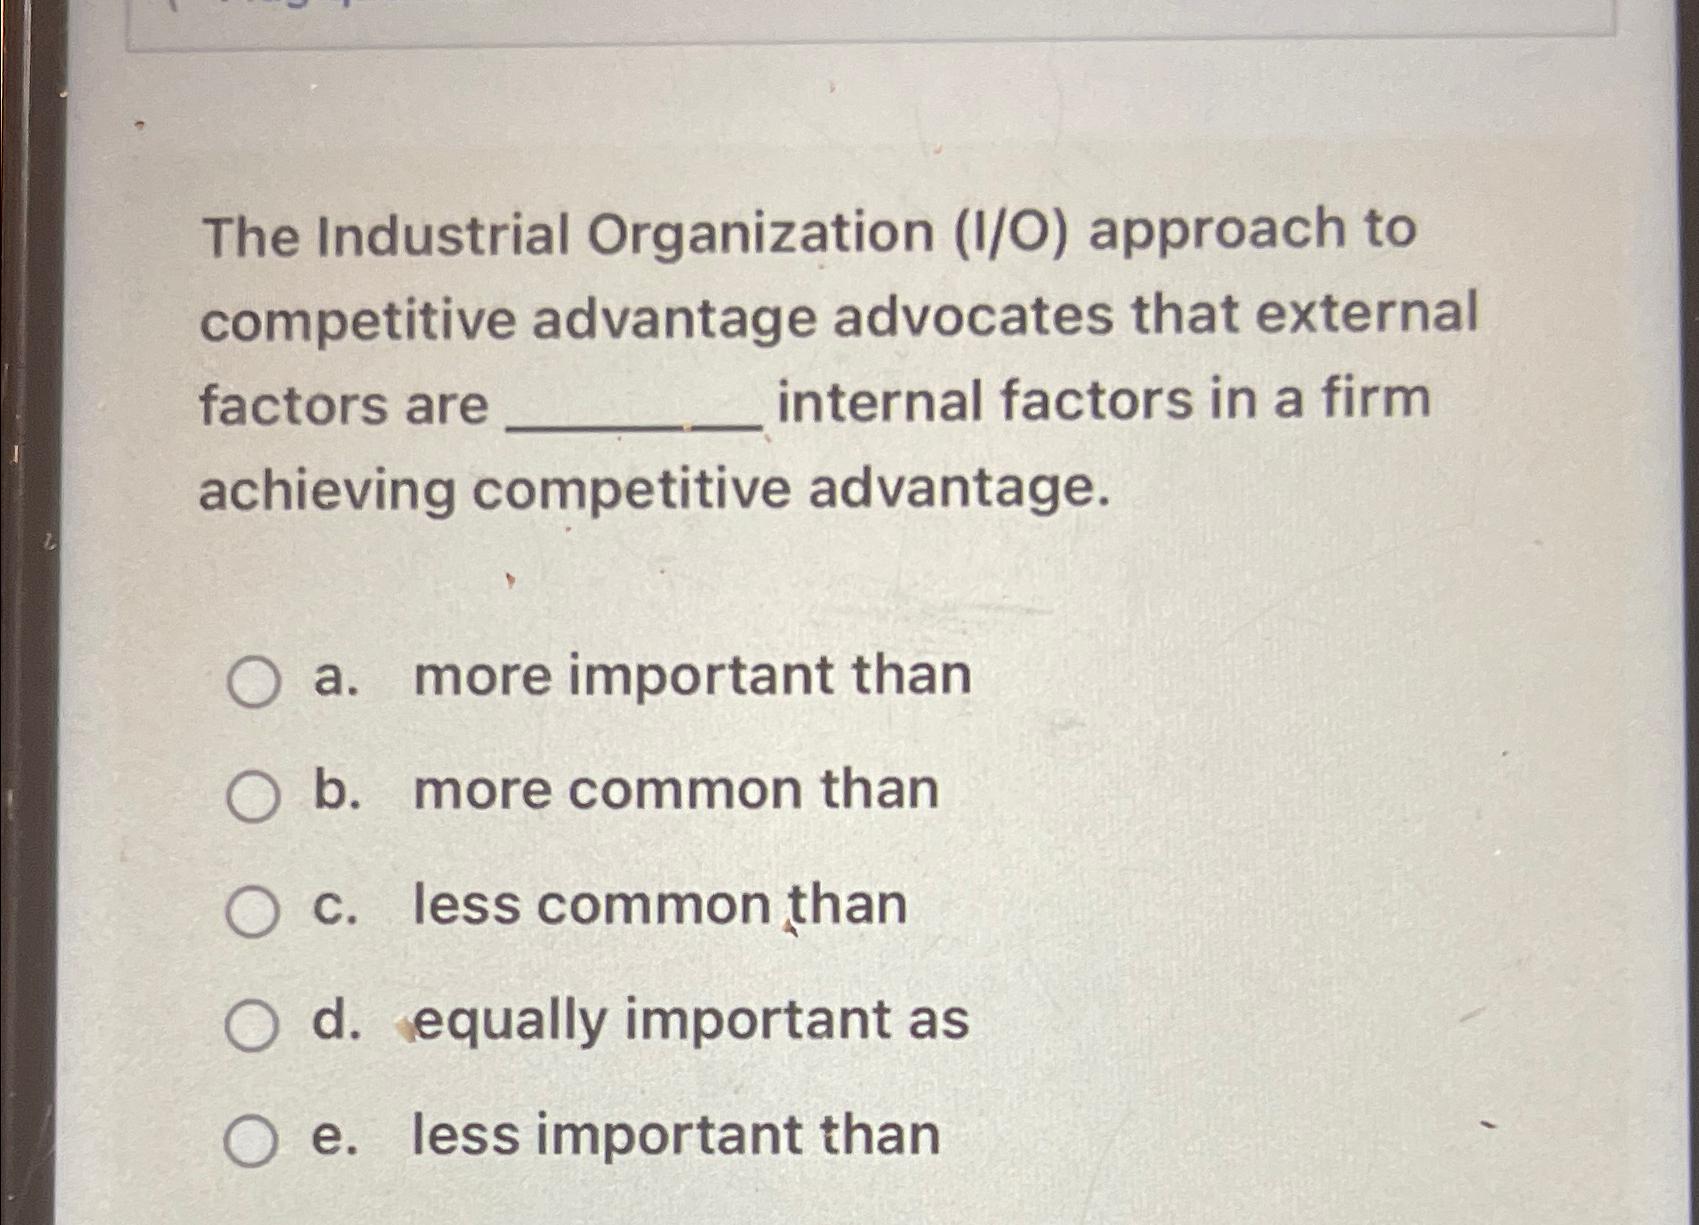 The Industrial Organization (1/0) approach to competitive advantage advocates that external factors are